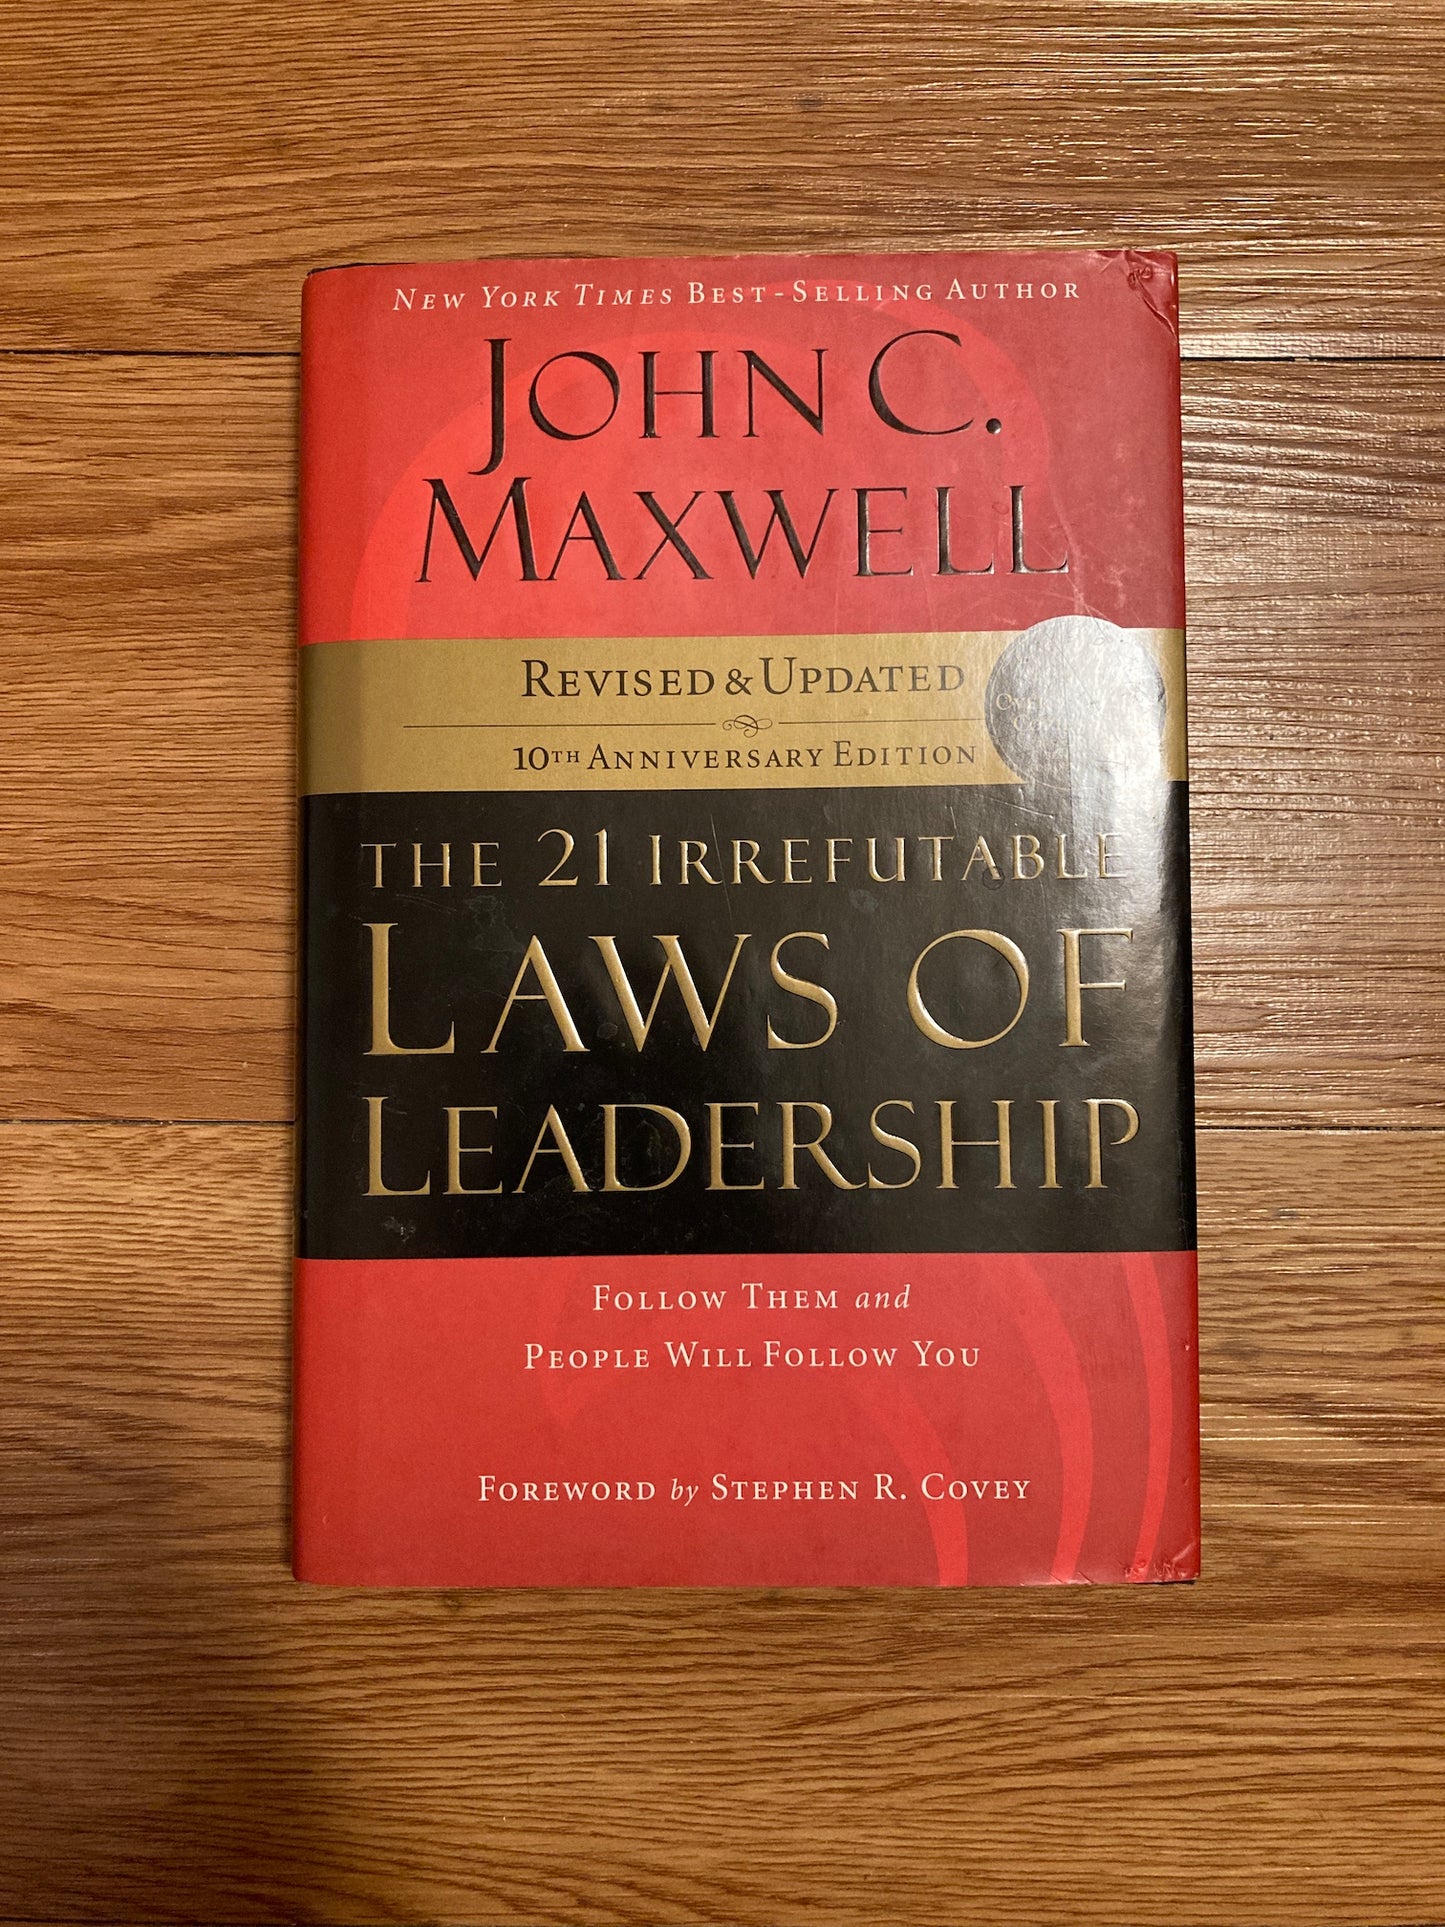 The 21 Irrefutable Laws of Leadership: Follow Them and People